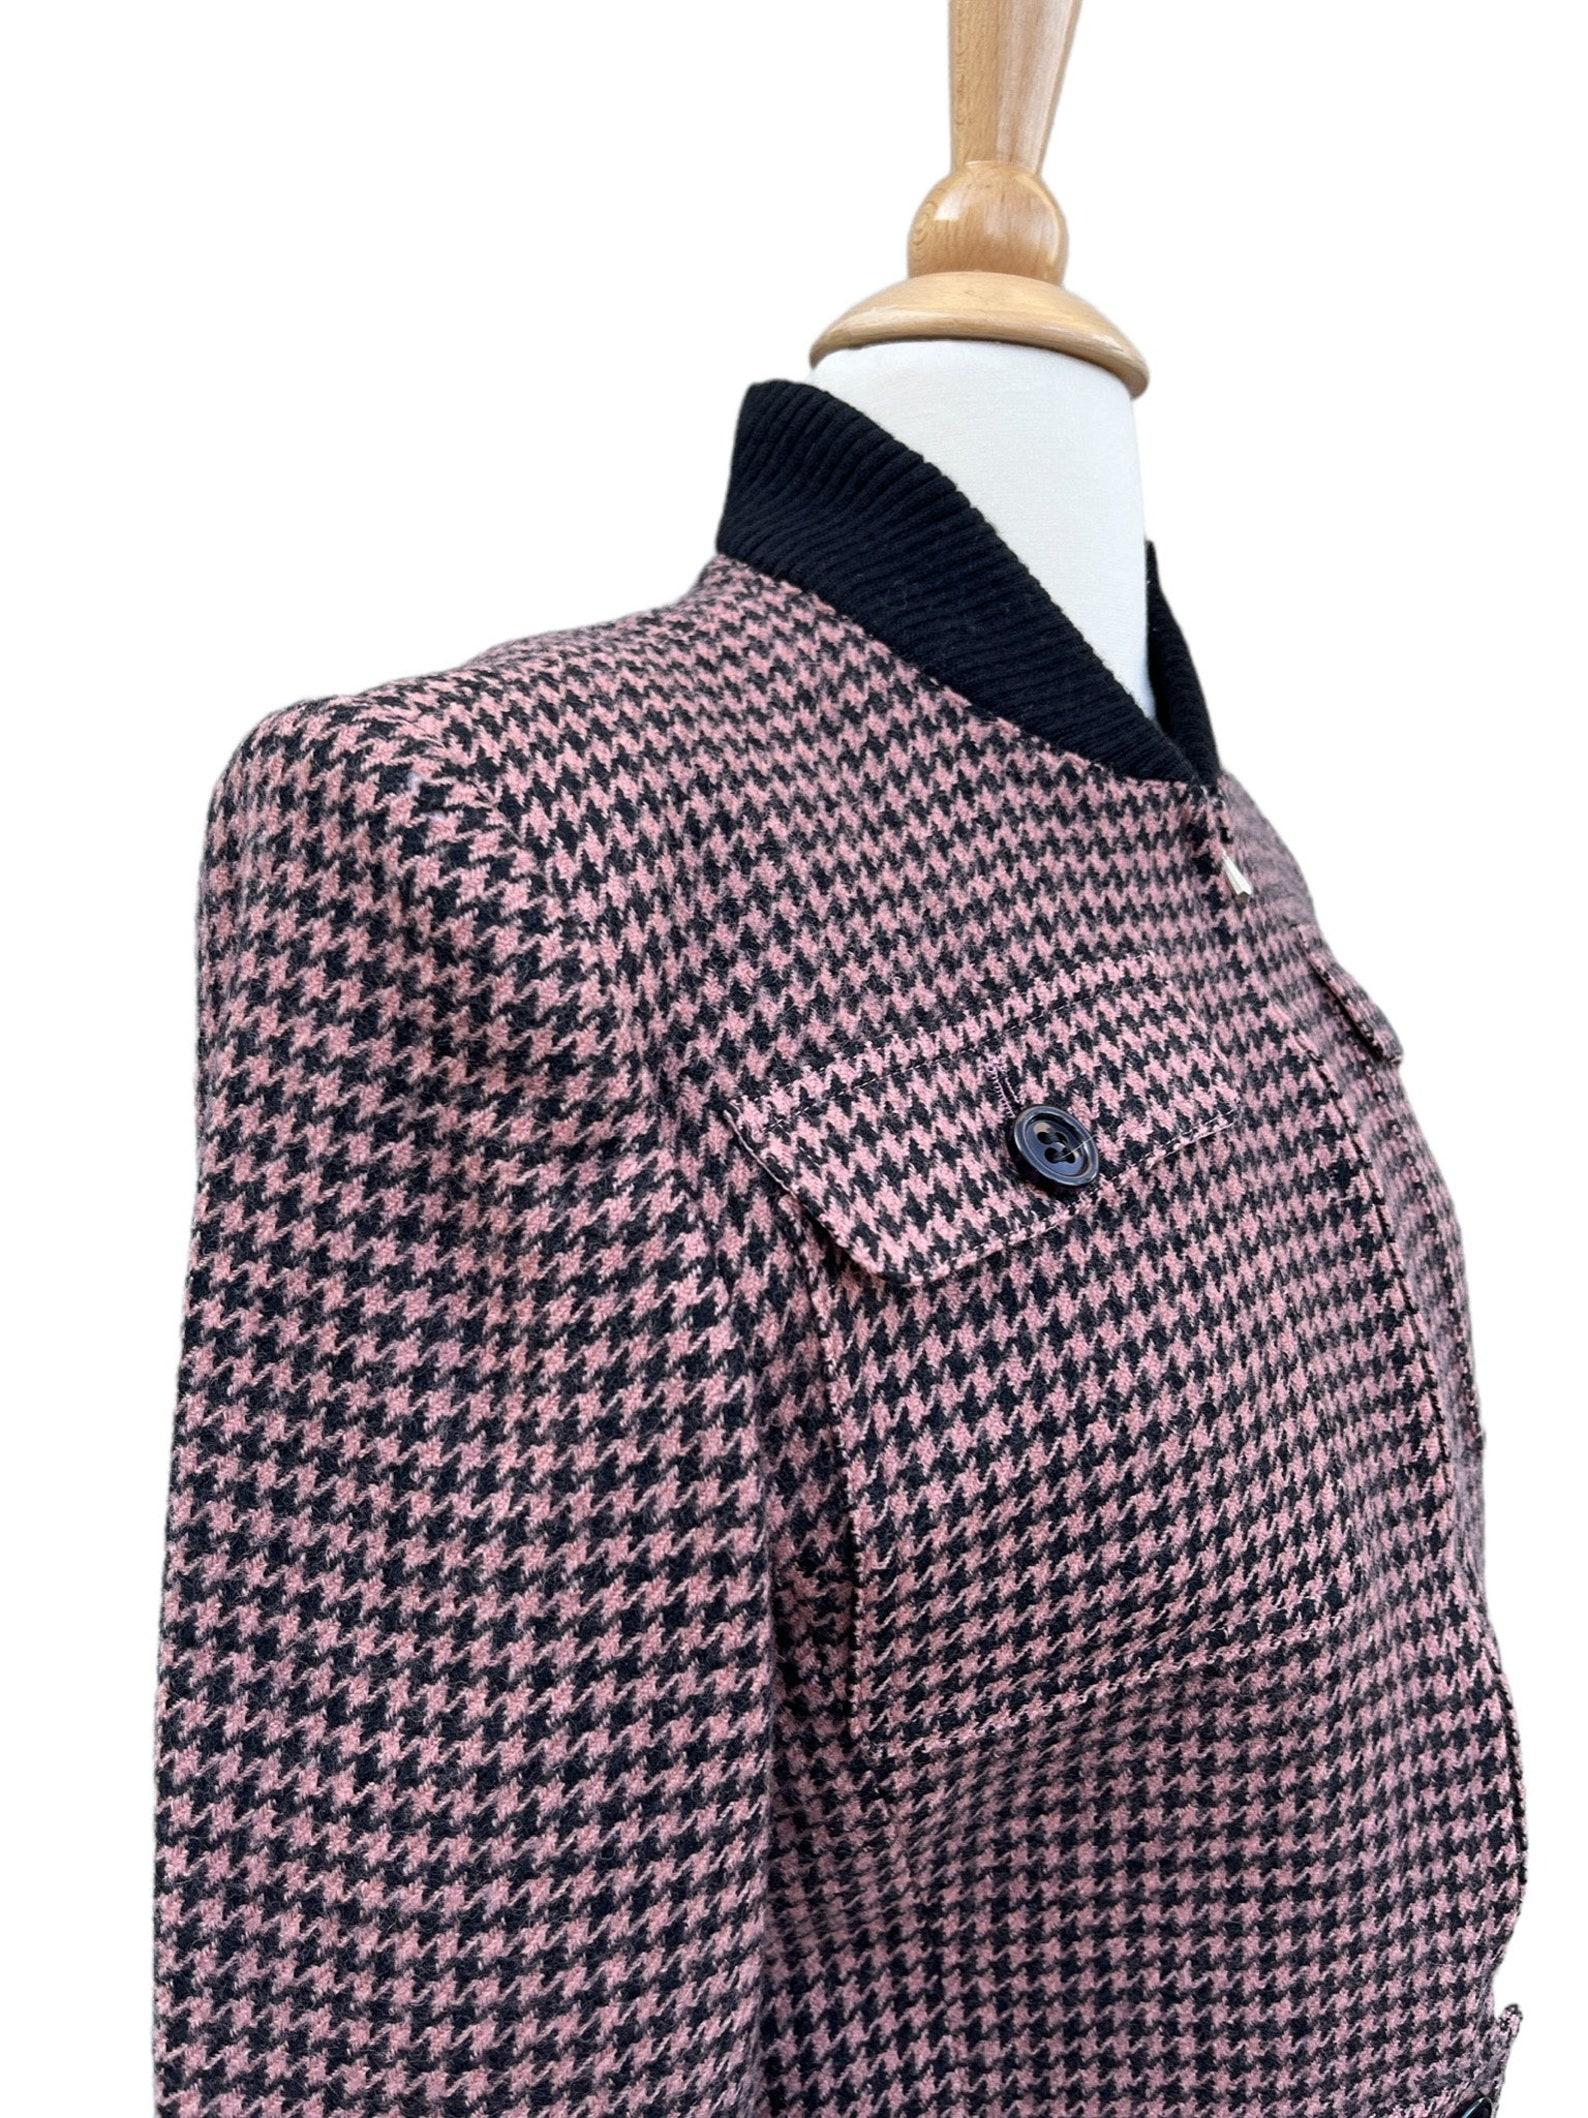 Guy Laroche houndstooth jacket For Sale 5